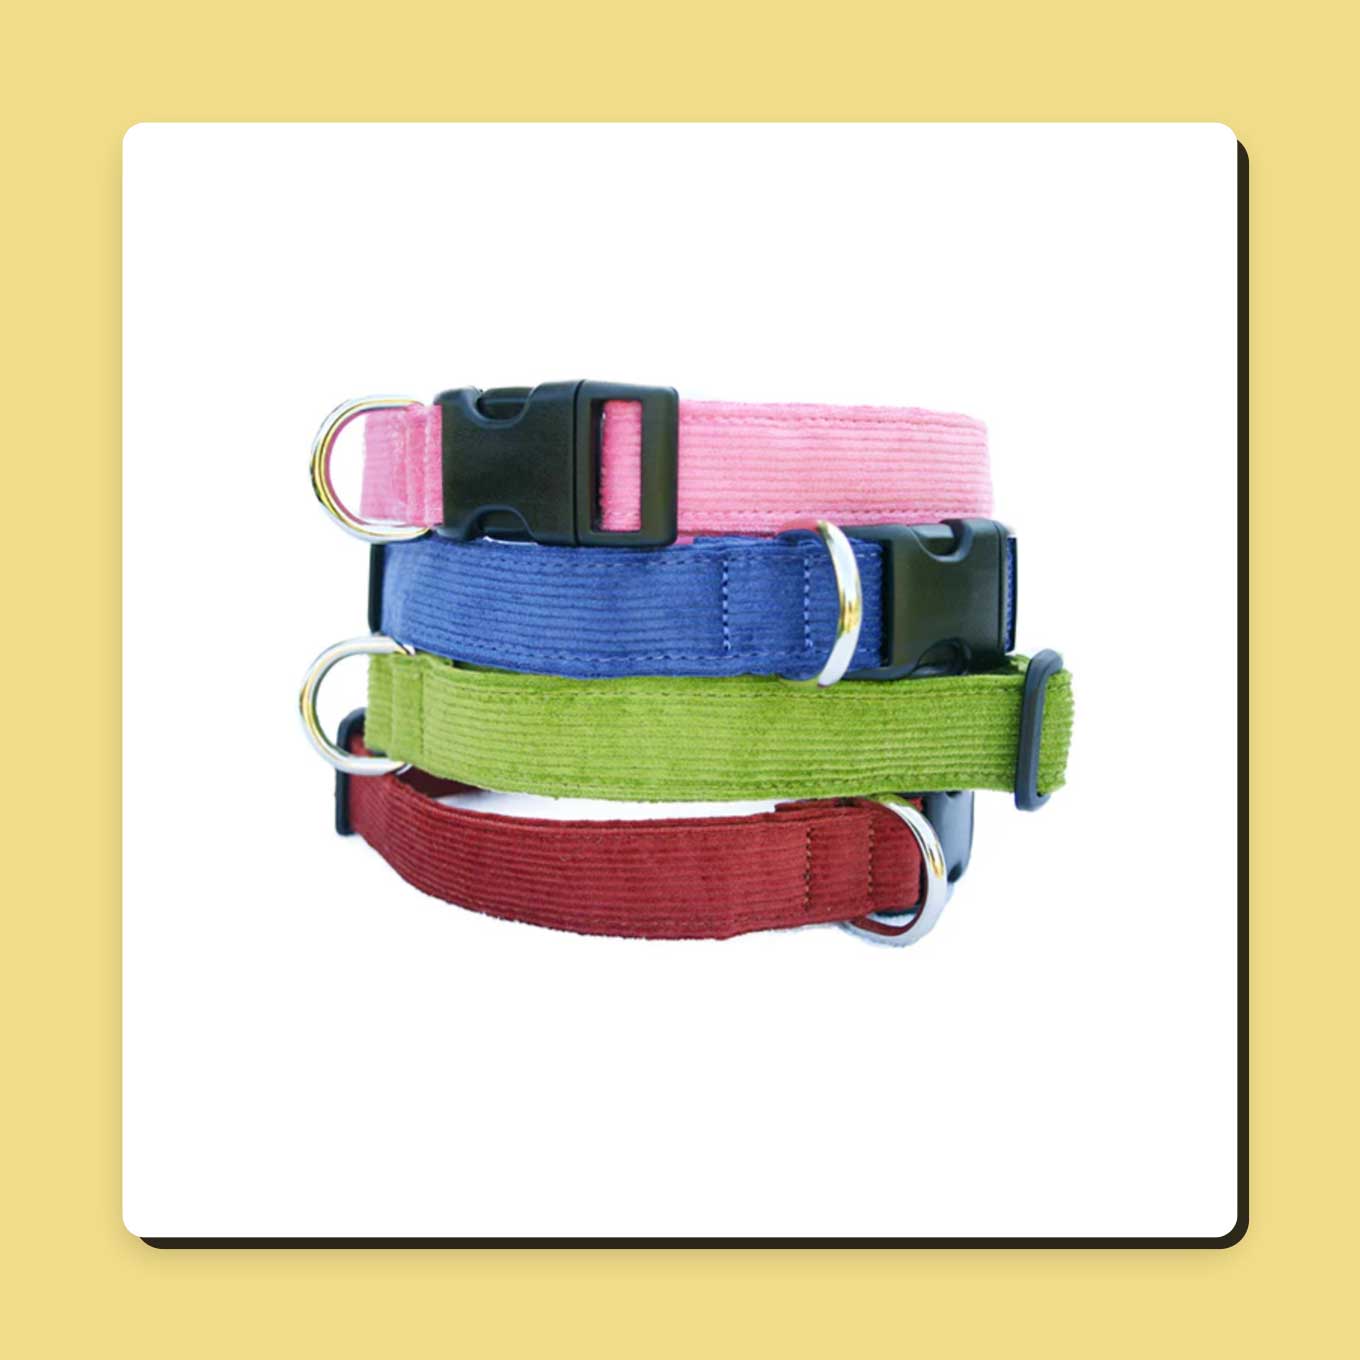 A stack of four dog collars in various colors